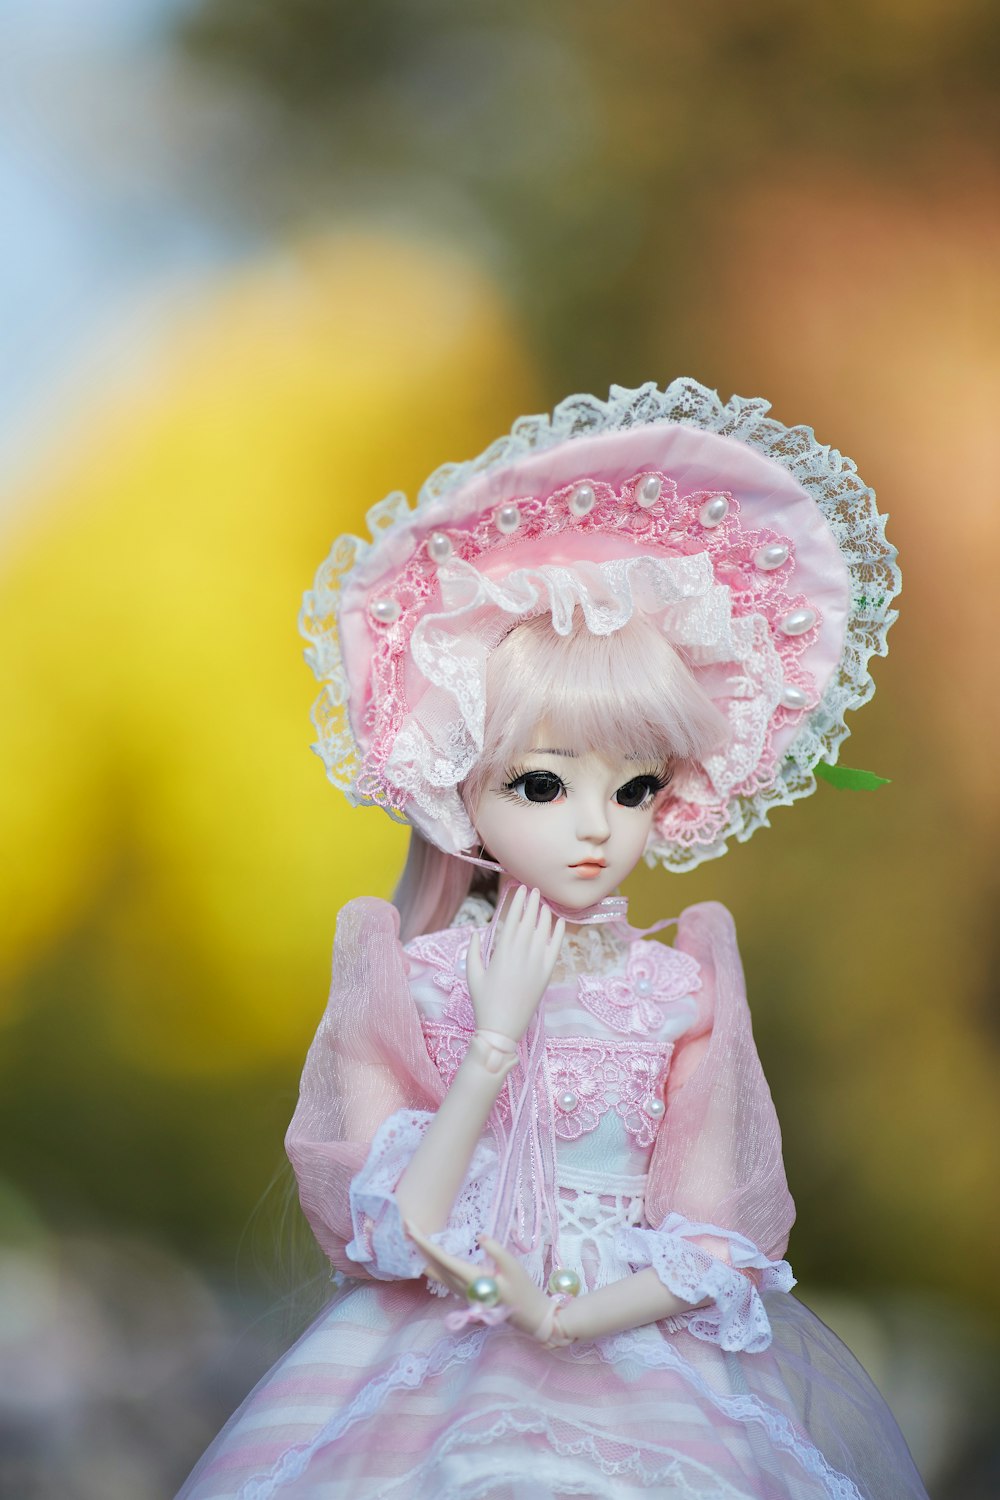 Exquisite Doll Images in Full 4K Resolution: An Enchanting Compilation of over 999 Doll Pictures